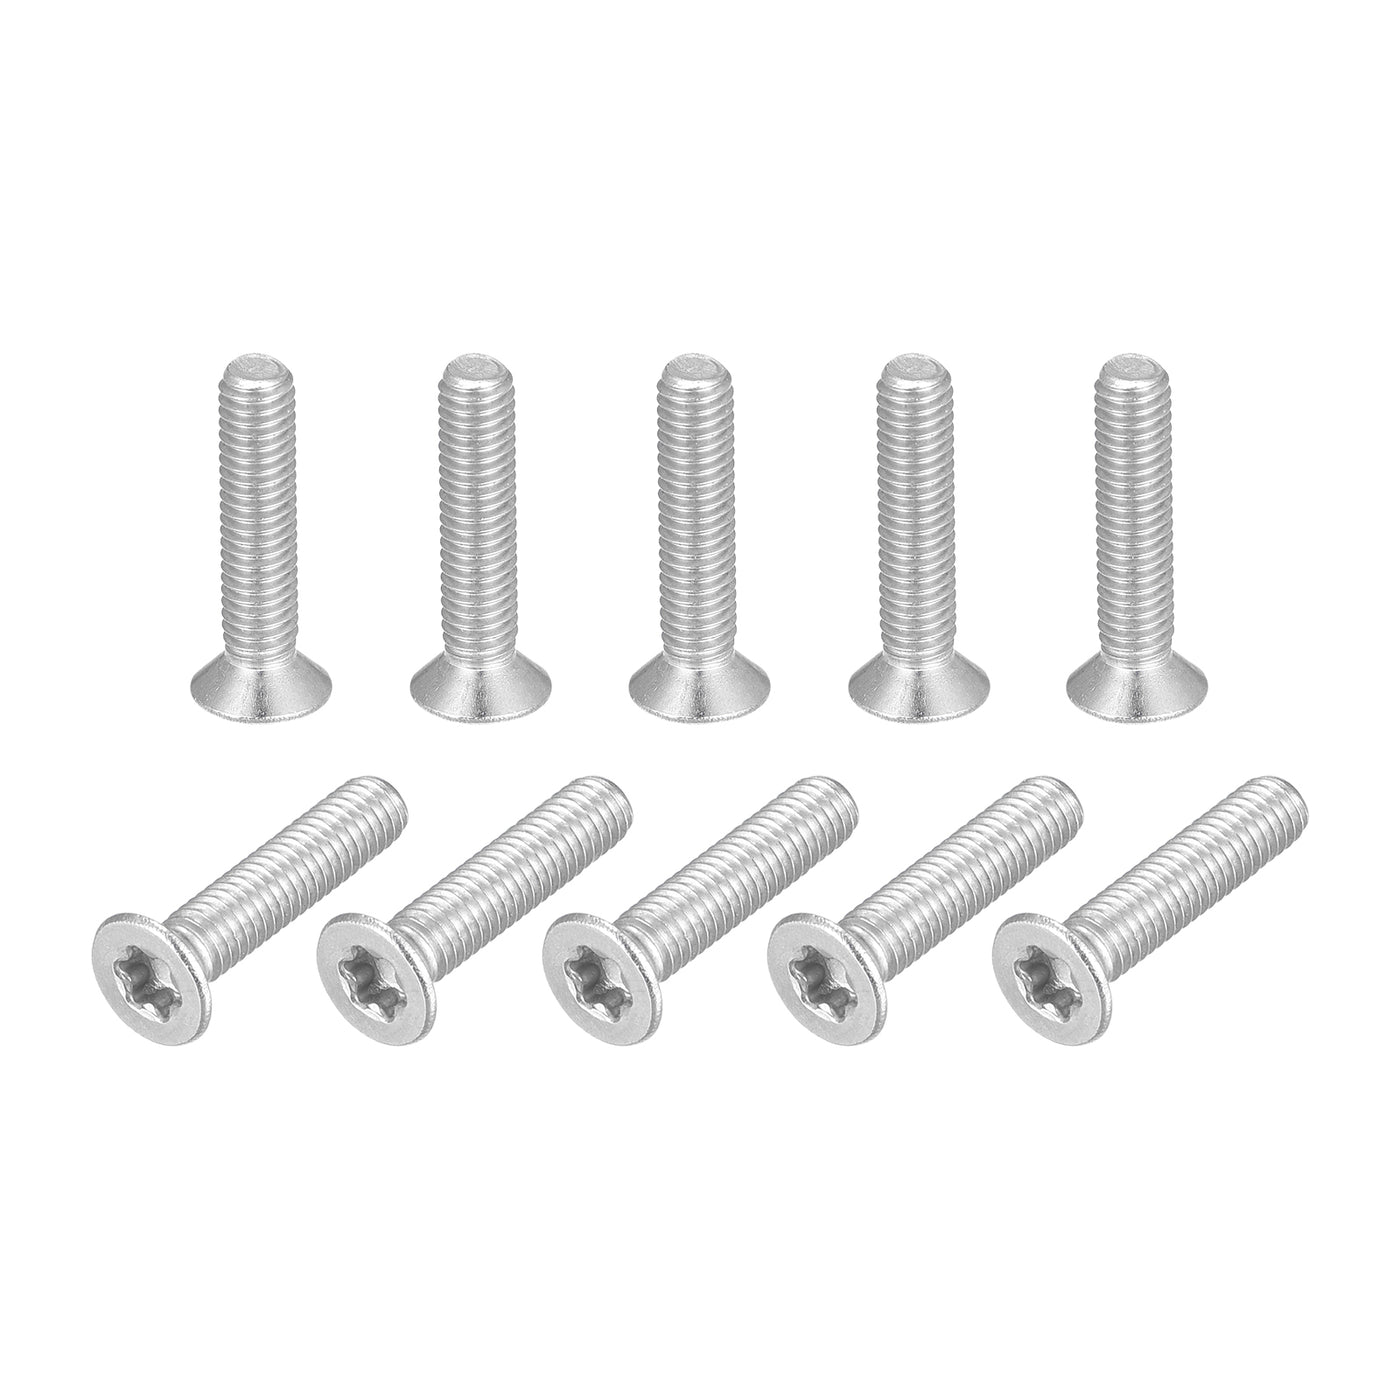 uxcell Uxcell M3x14mm Torx Security Screws, 20pcs 316 Stainless Steel Countersunk Head Screw